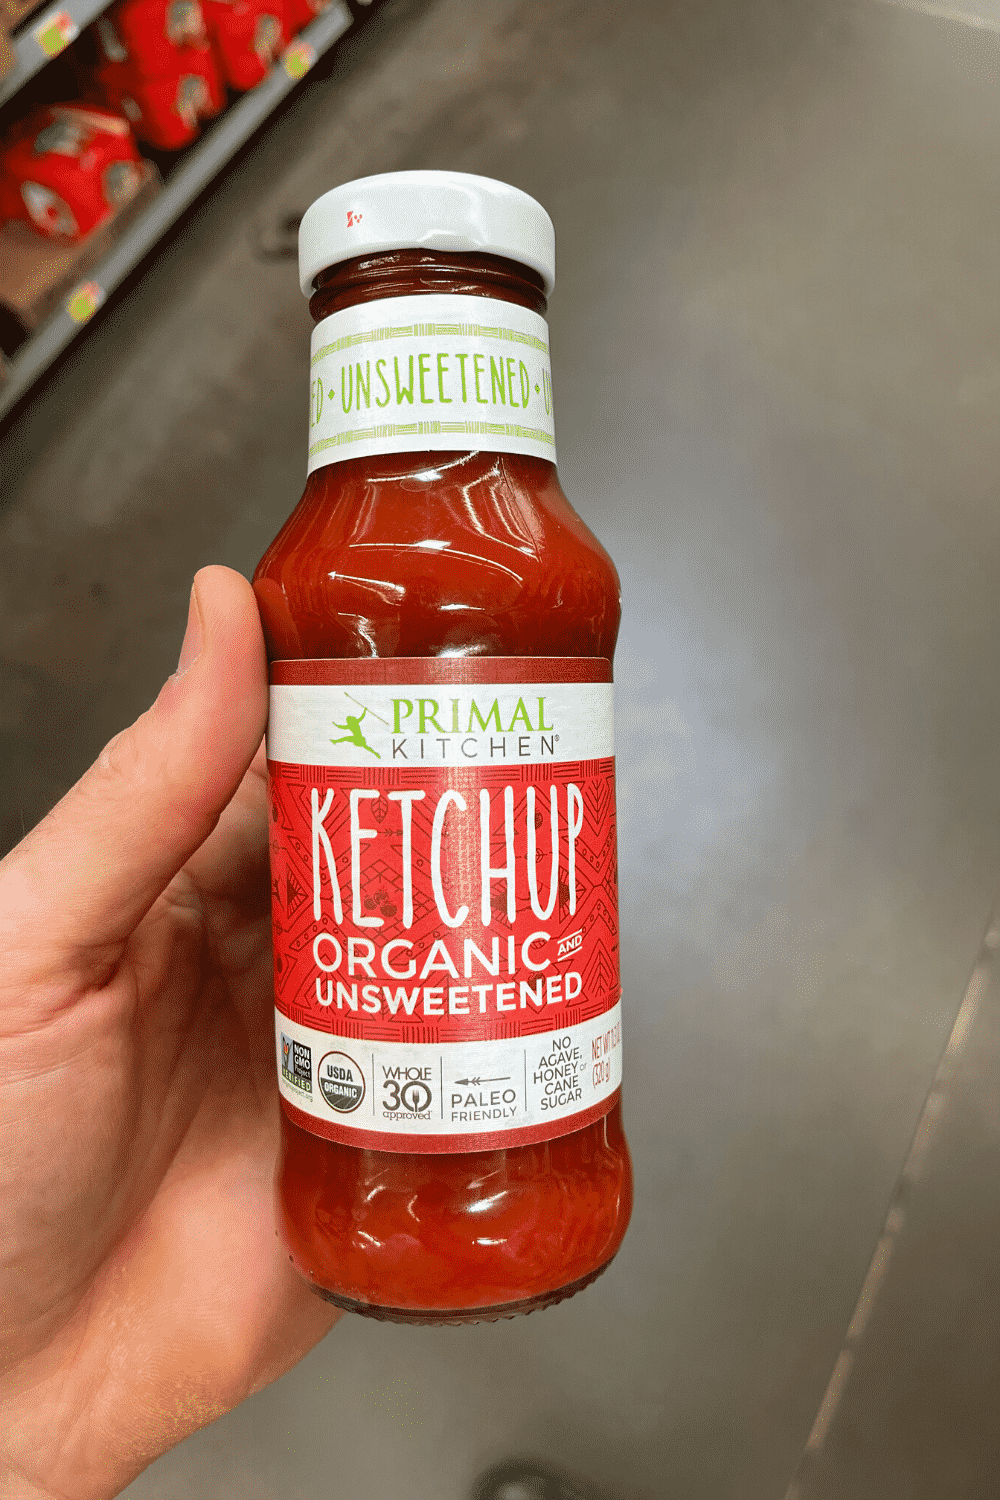 A hand holding a bottle of organic unsweetened ketchup.